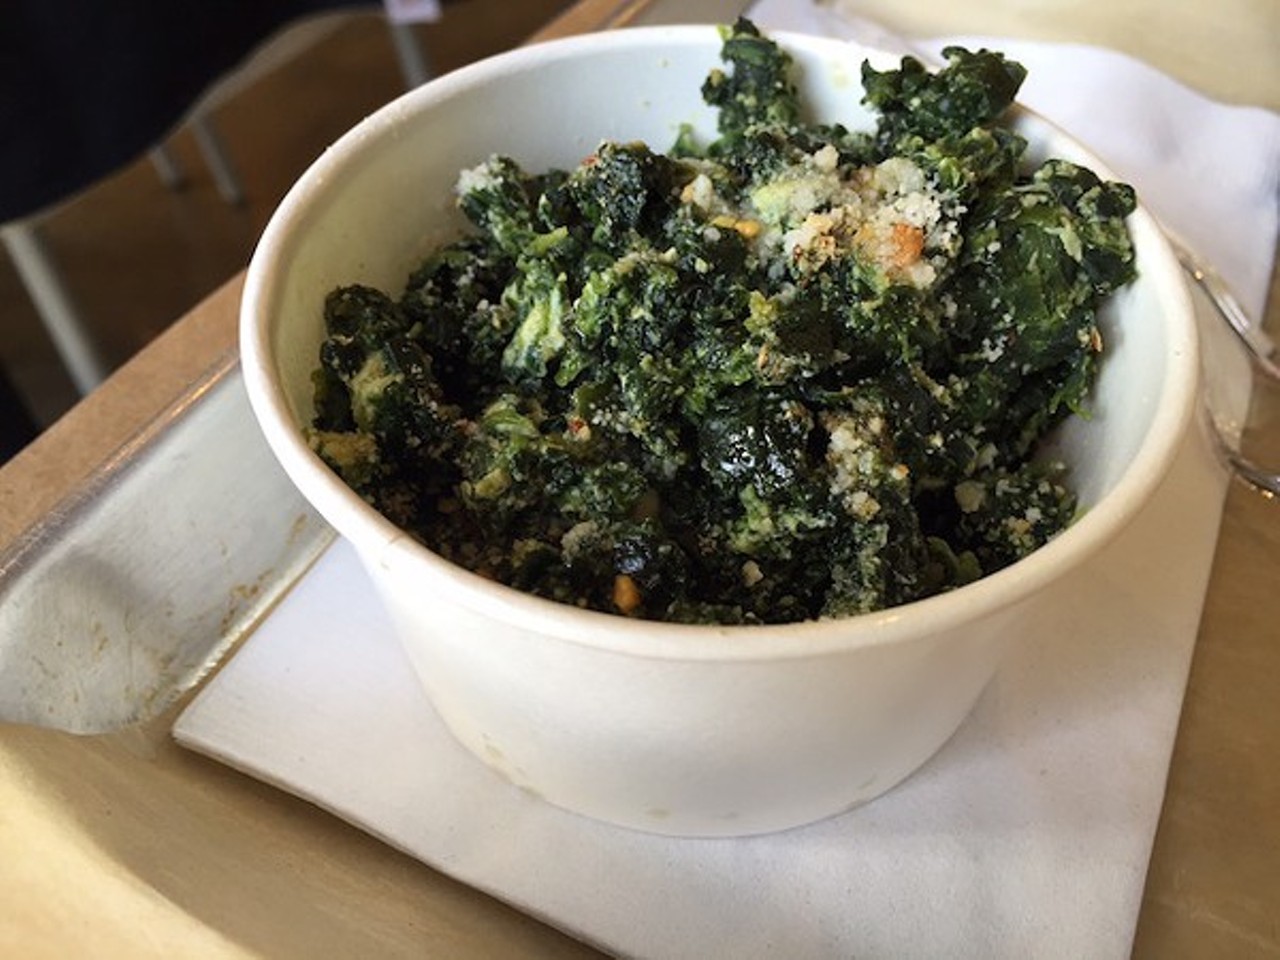 The sides list includes Calabrese-style spinach with egg (pictured), braised greens in lemon sauce, rice with chicken livers & lentils, and more. Open Tuesday through Saturday, Peno delivers as late as 10 p.m. on weekdays and 11 p.m. on weekends. That should basically seal the deal if you&#146;re debating whether or not to order something. Photo by Sarah Fenske.